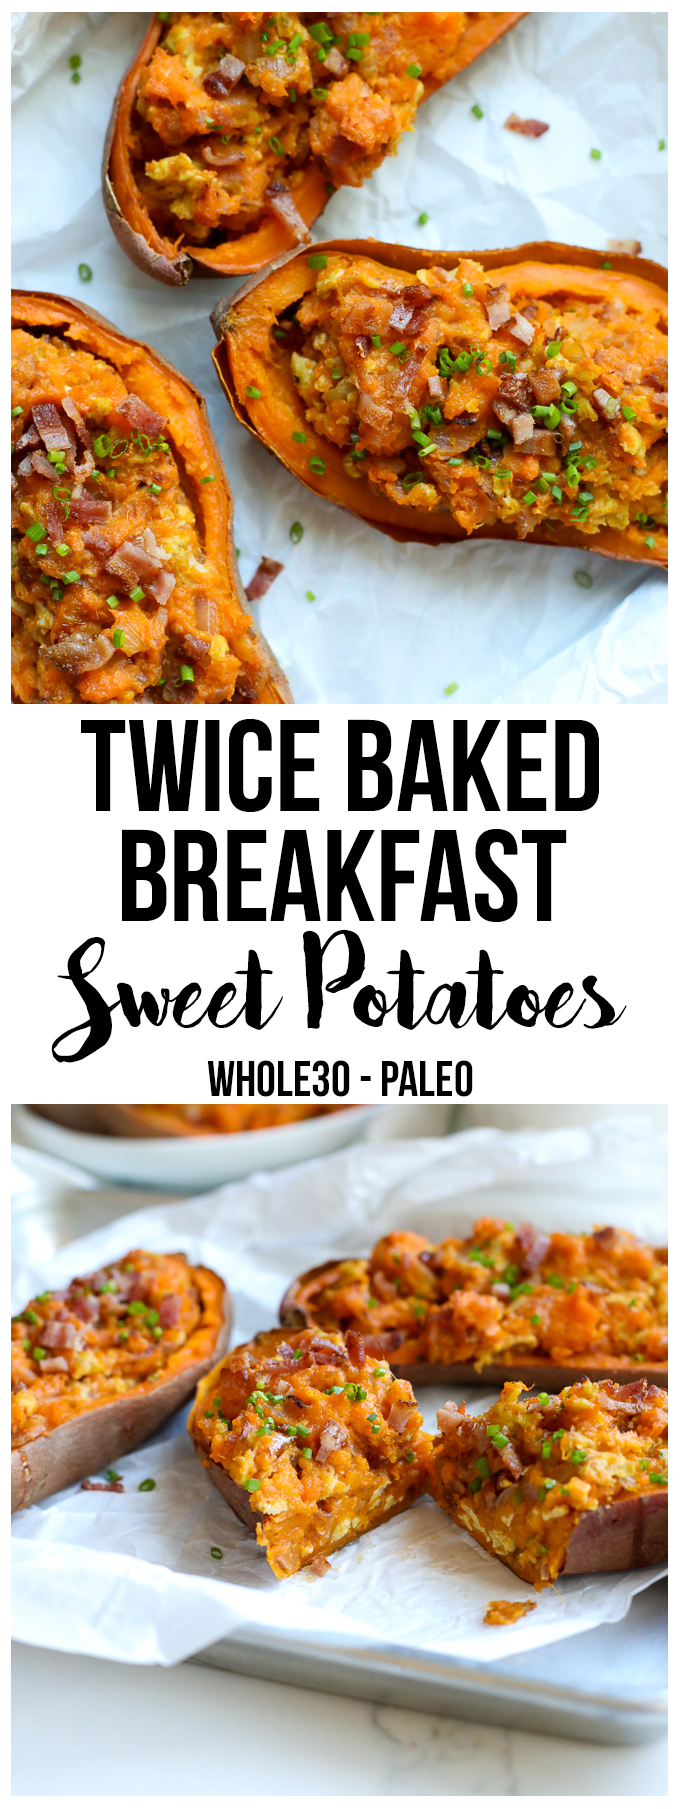 These Twice Baked Breakfast Sweet Potatoes recipe is perfect for a whole30 breakfast that everyone in the family will love!